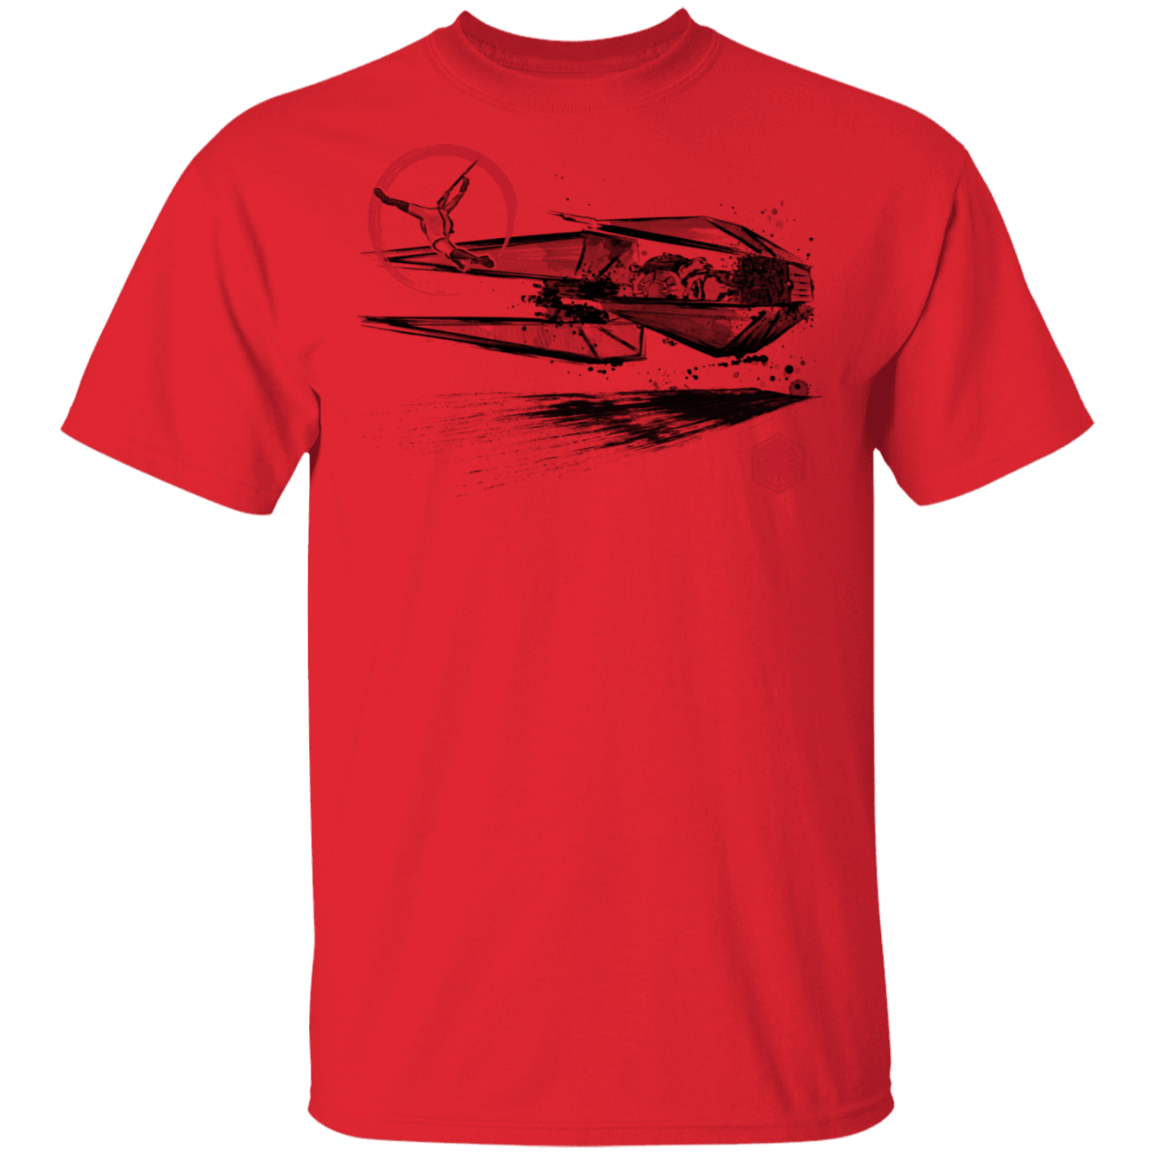 T-Shirts Red / S Confrontation on Pasaana Desert T-Shirt